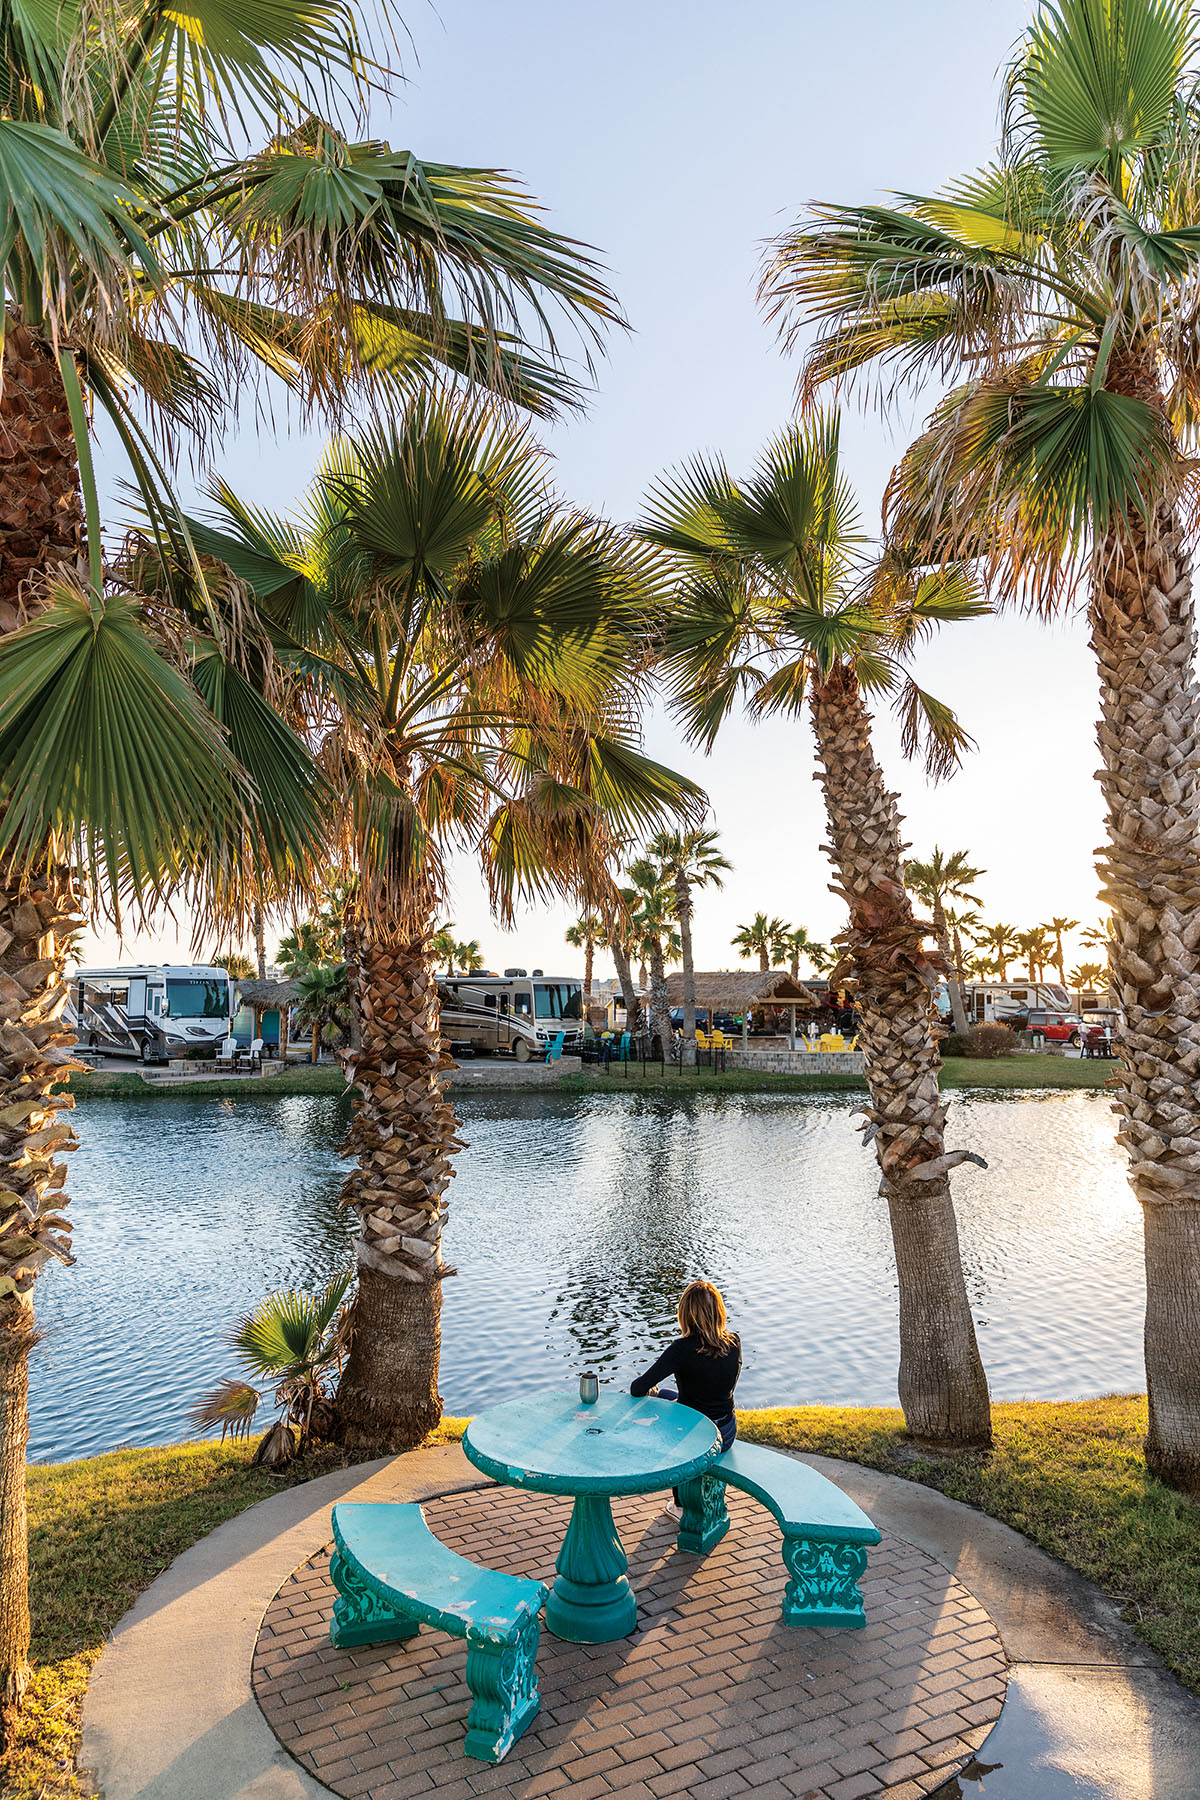 A person sits at a bright turquoise table underneath tall palm trees in a water-heavy setting